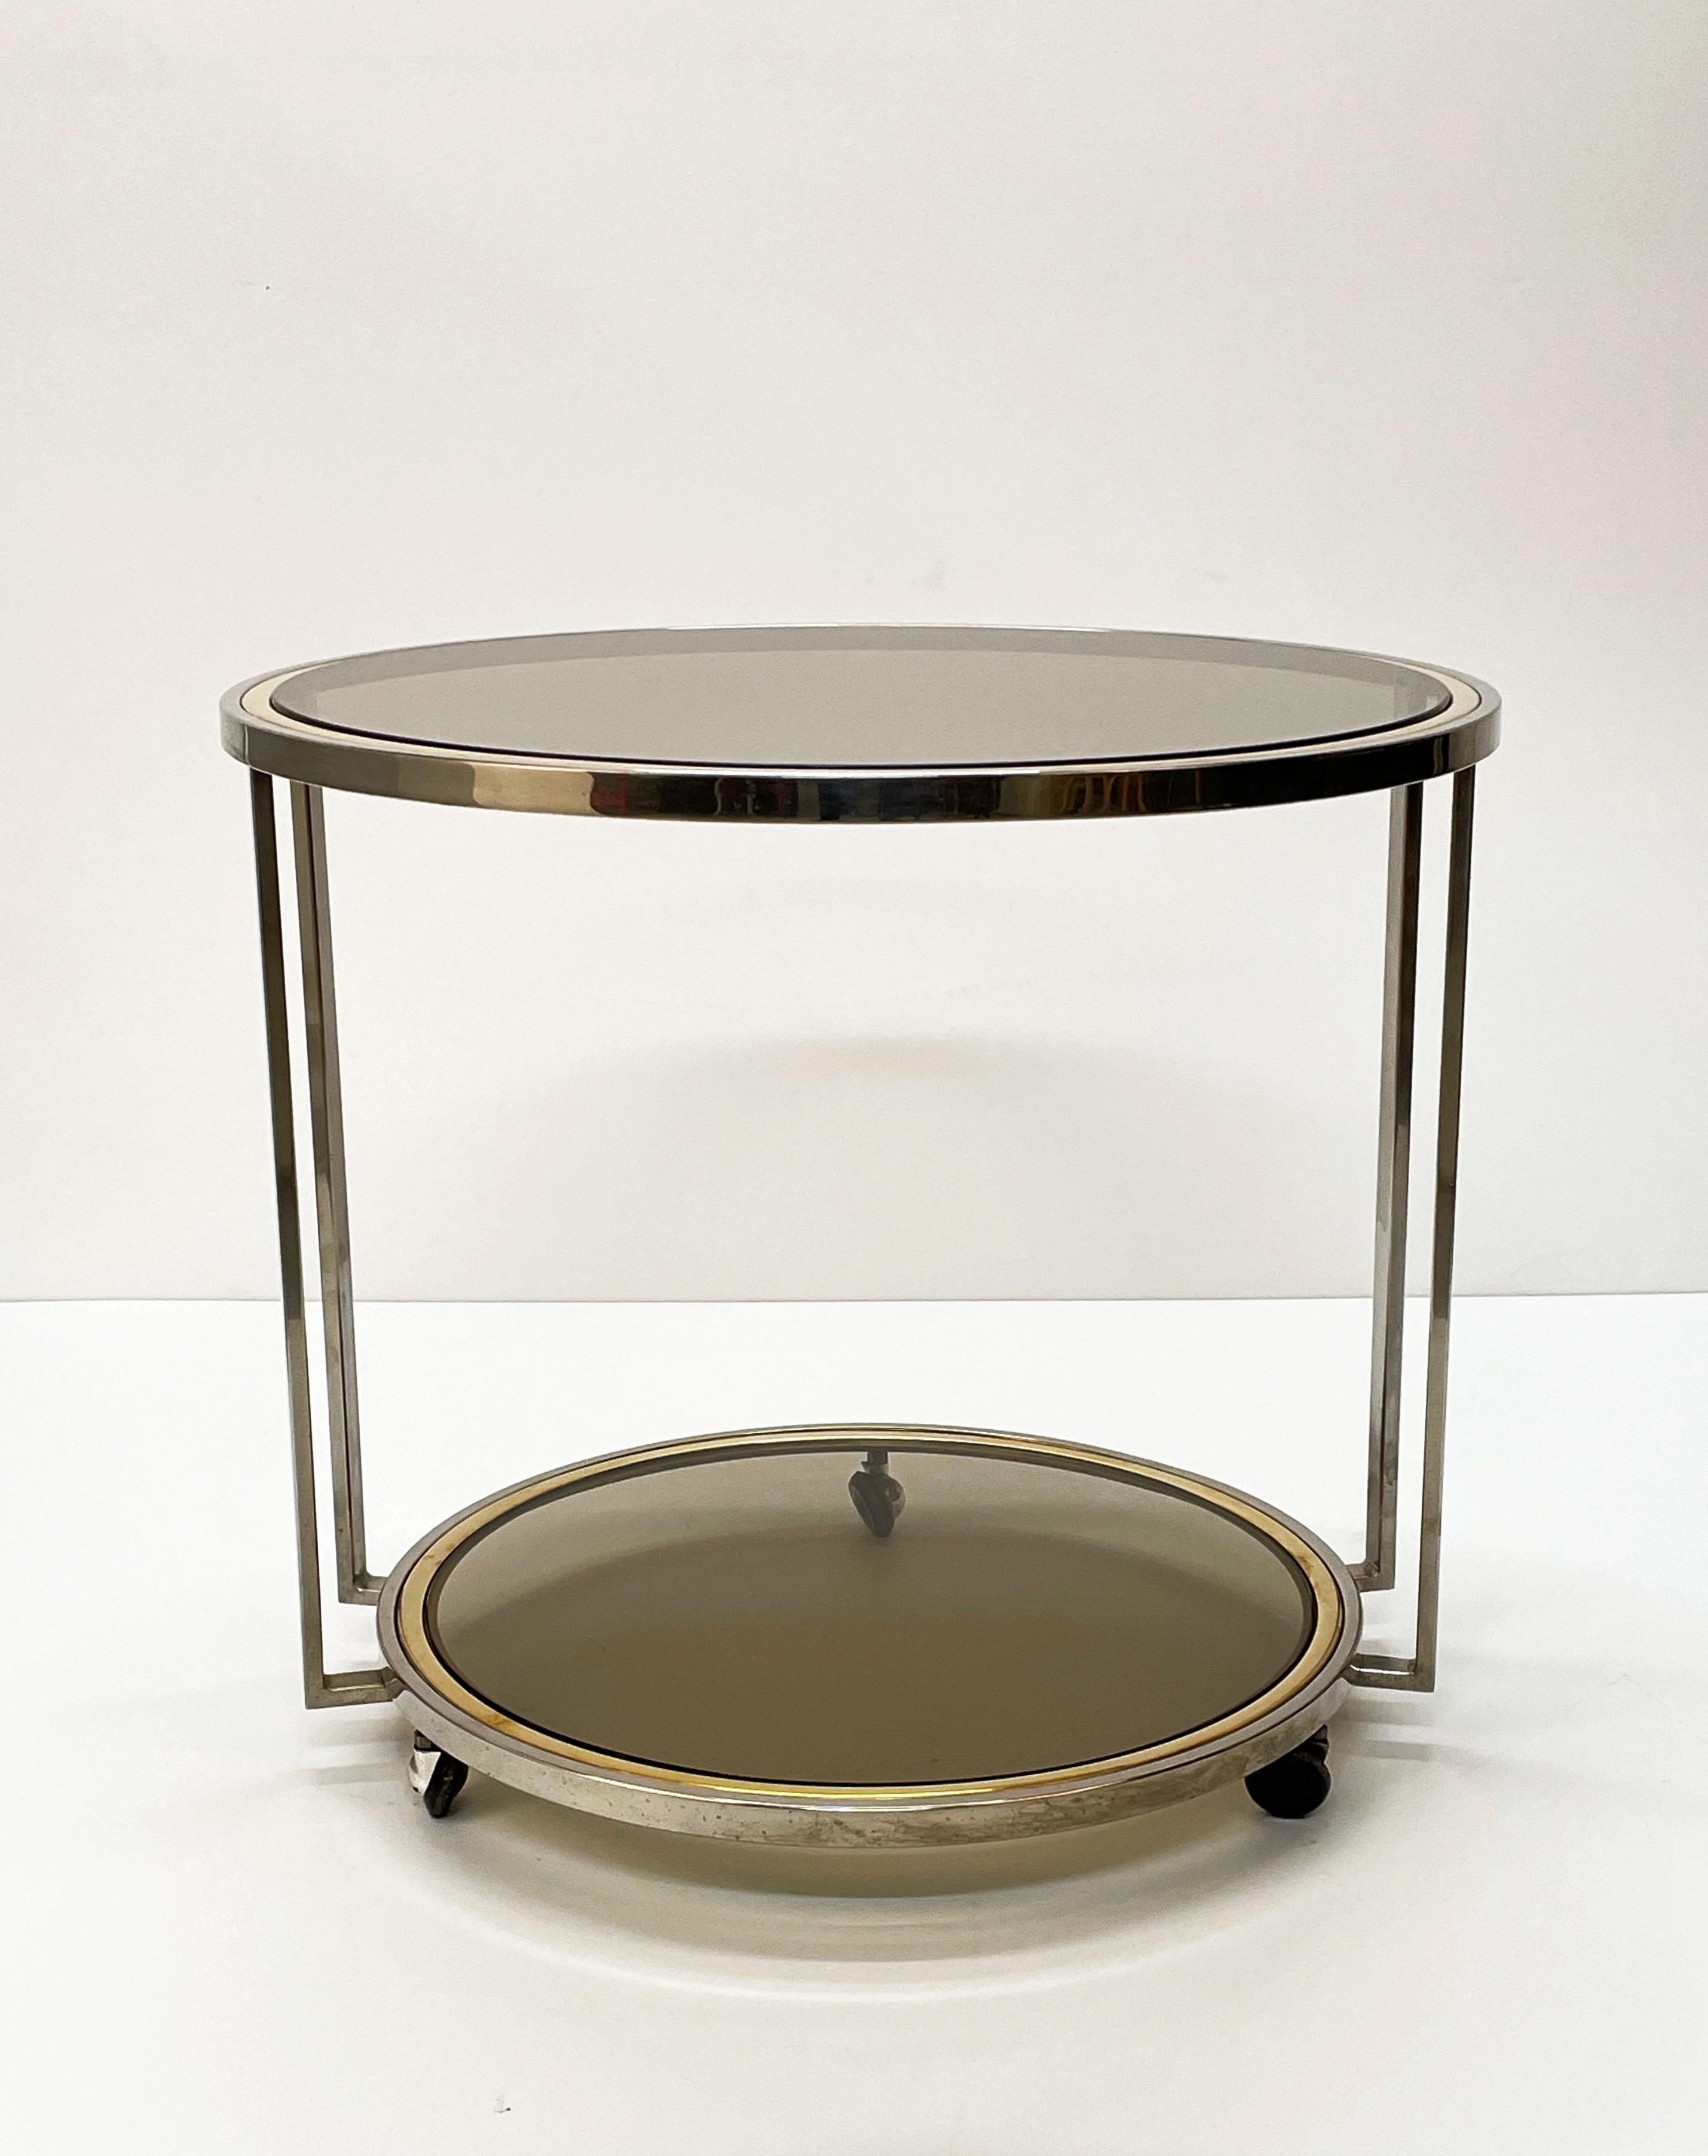 Midcentury Brass and Chrome and Glass Italian Coffee Table after Romeo Rega 1970 For Sale 4